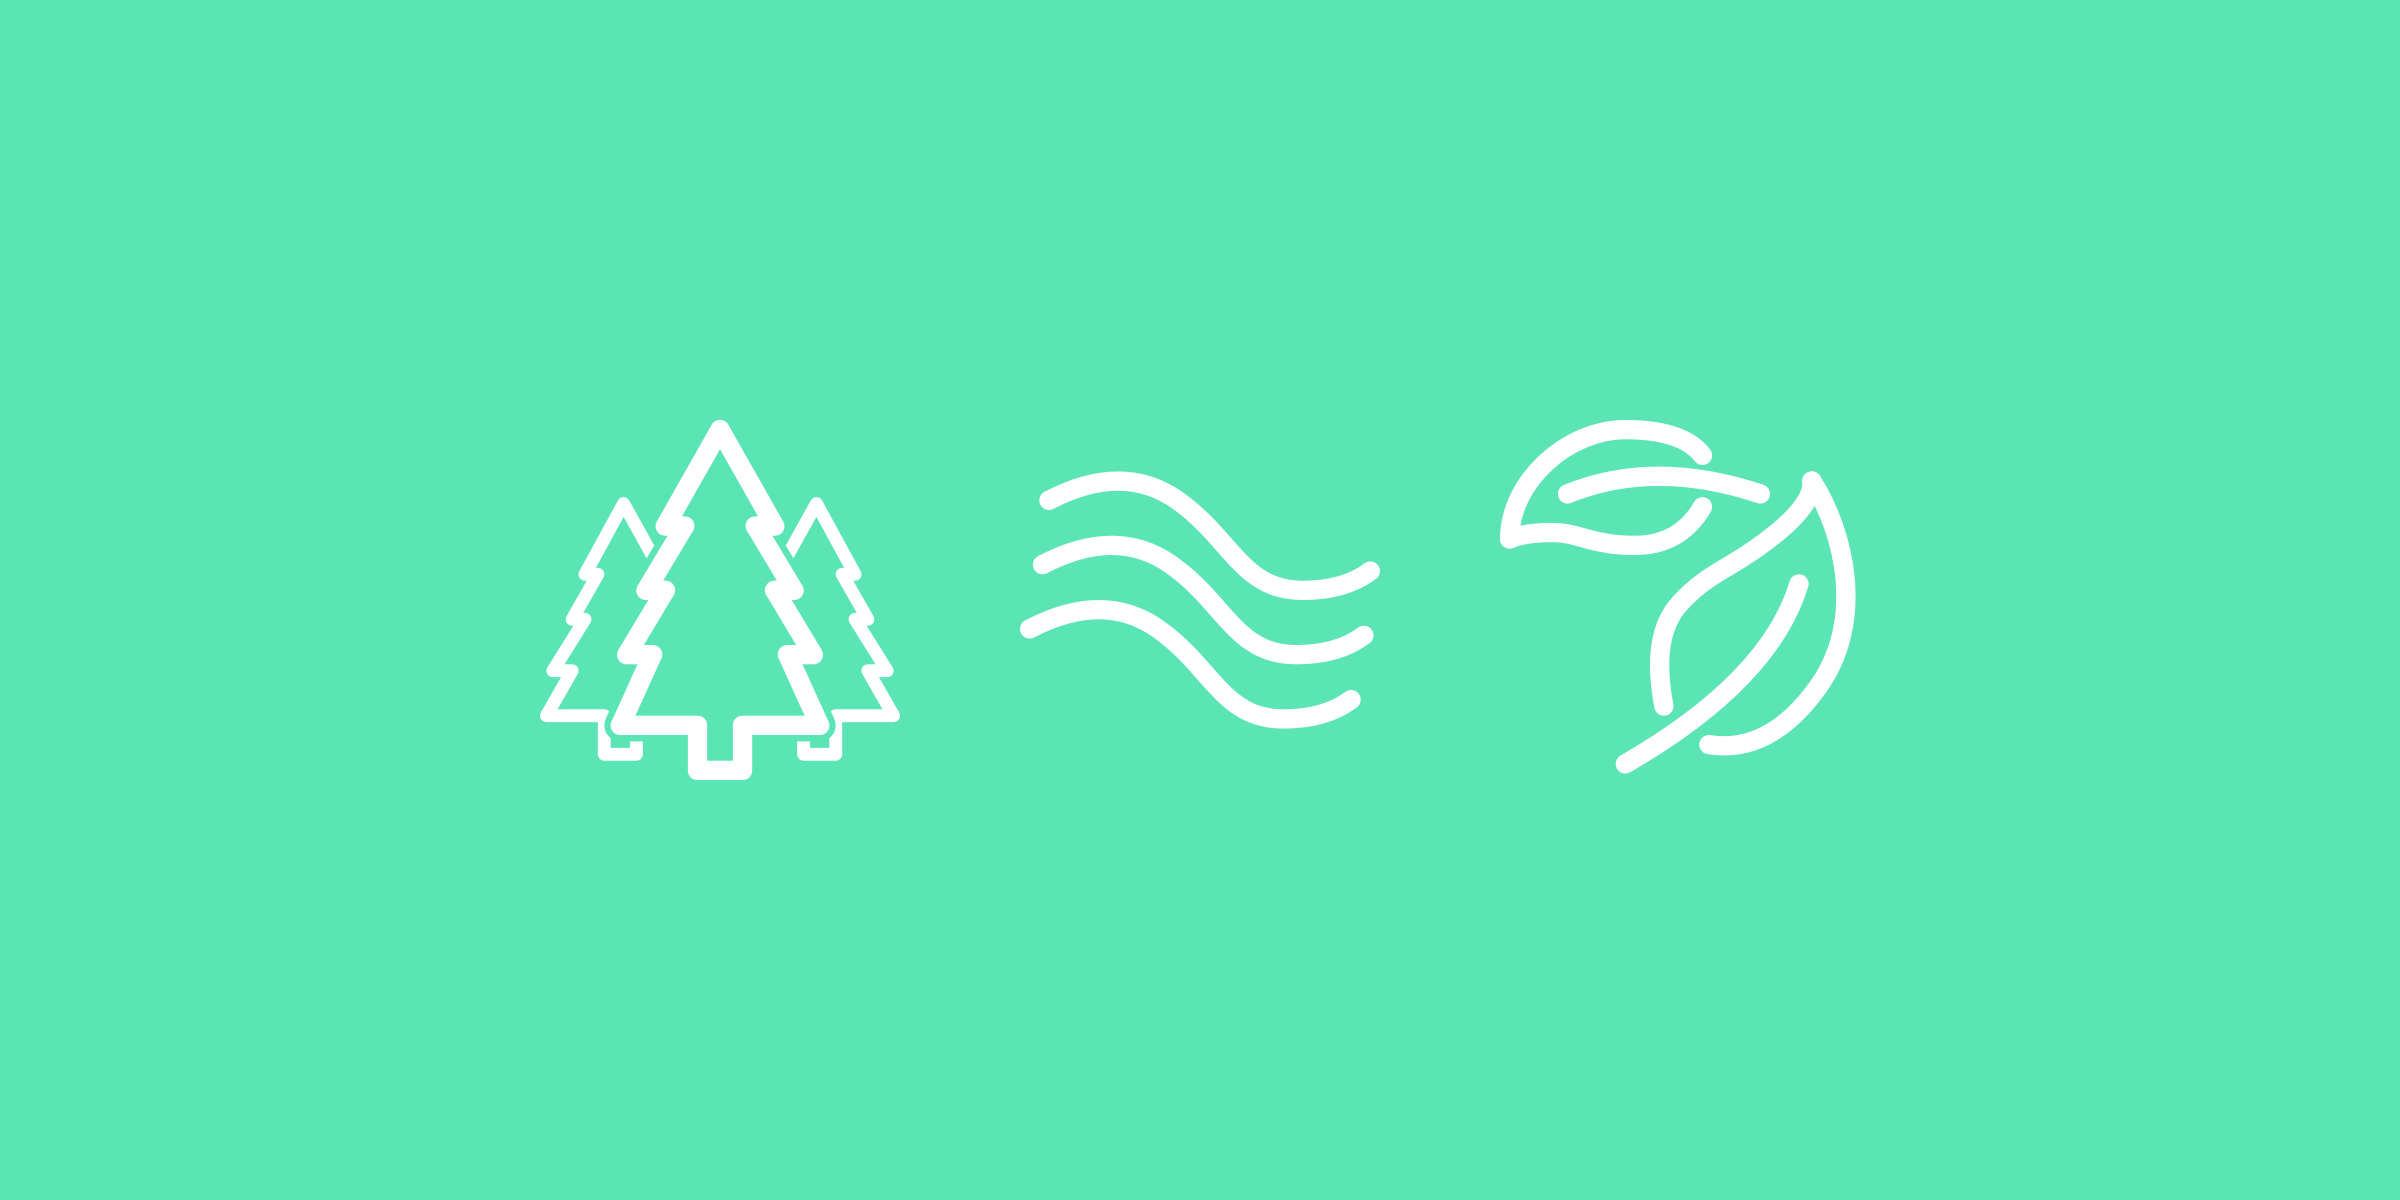 Noisli - Improve Focus and Boost Productivity with Background Sounds